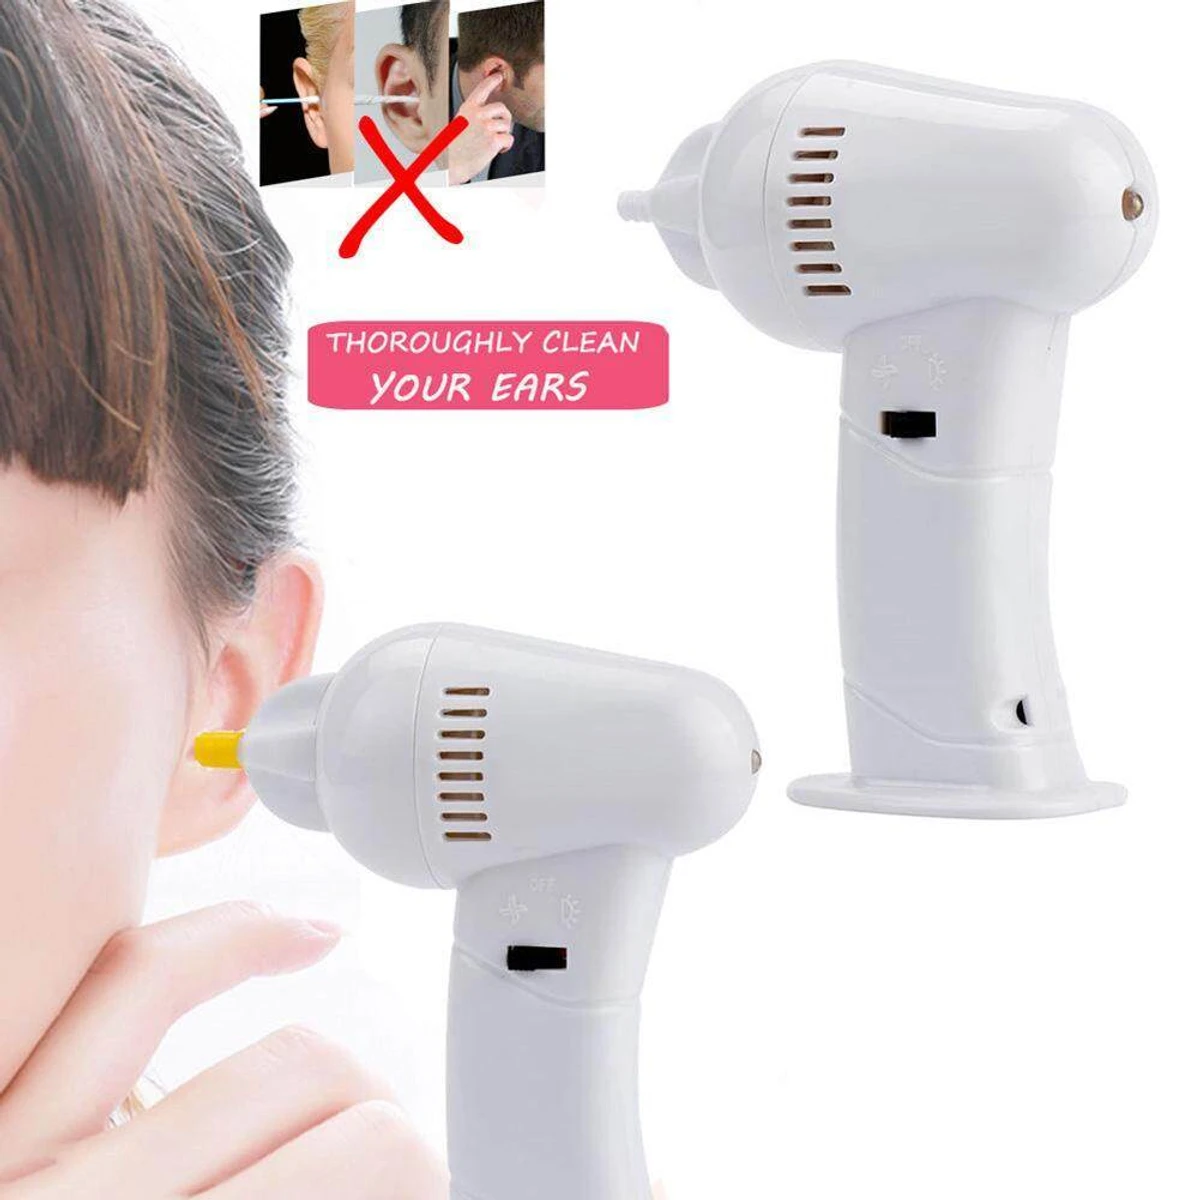 Portable Electronic Ear Vacuum Cleaner Ear Wax Vac Removal Safety Health Care-white